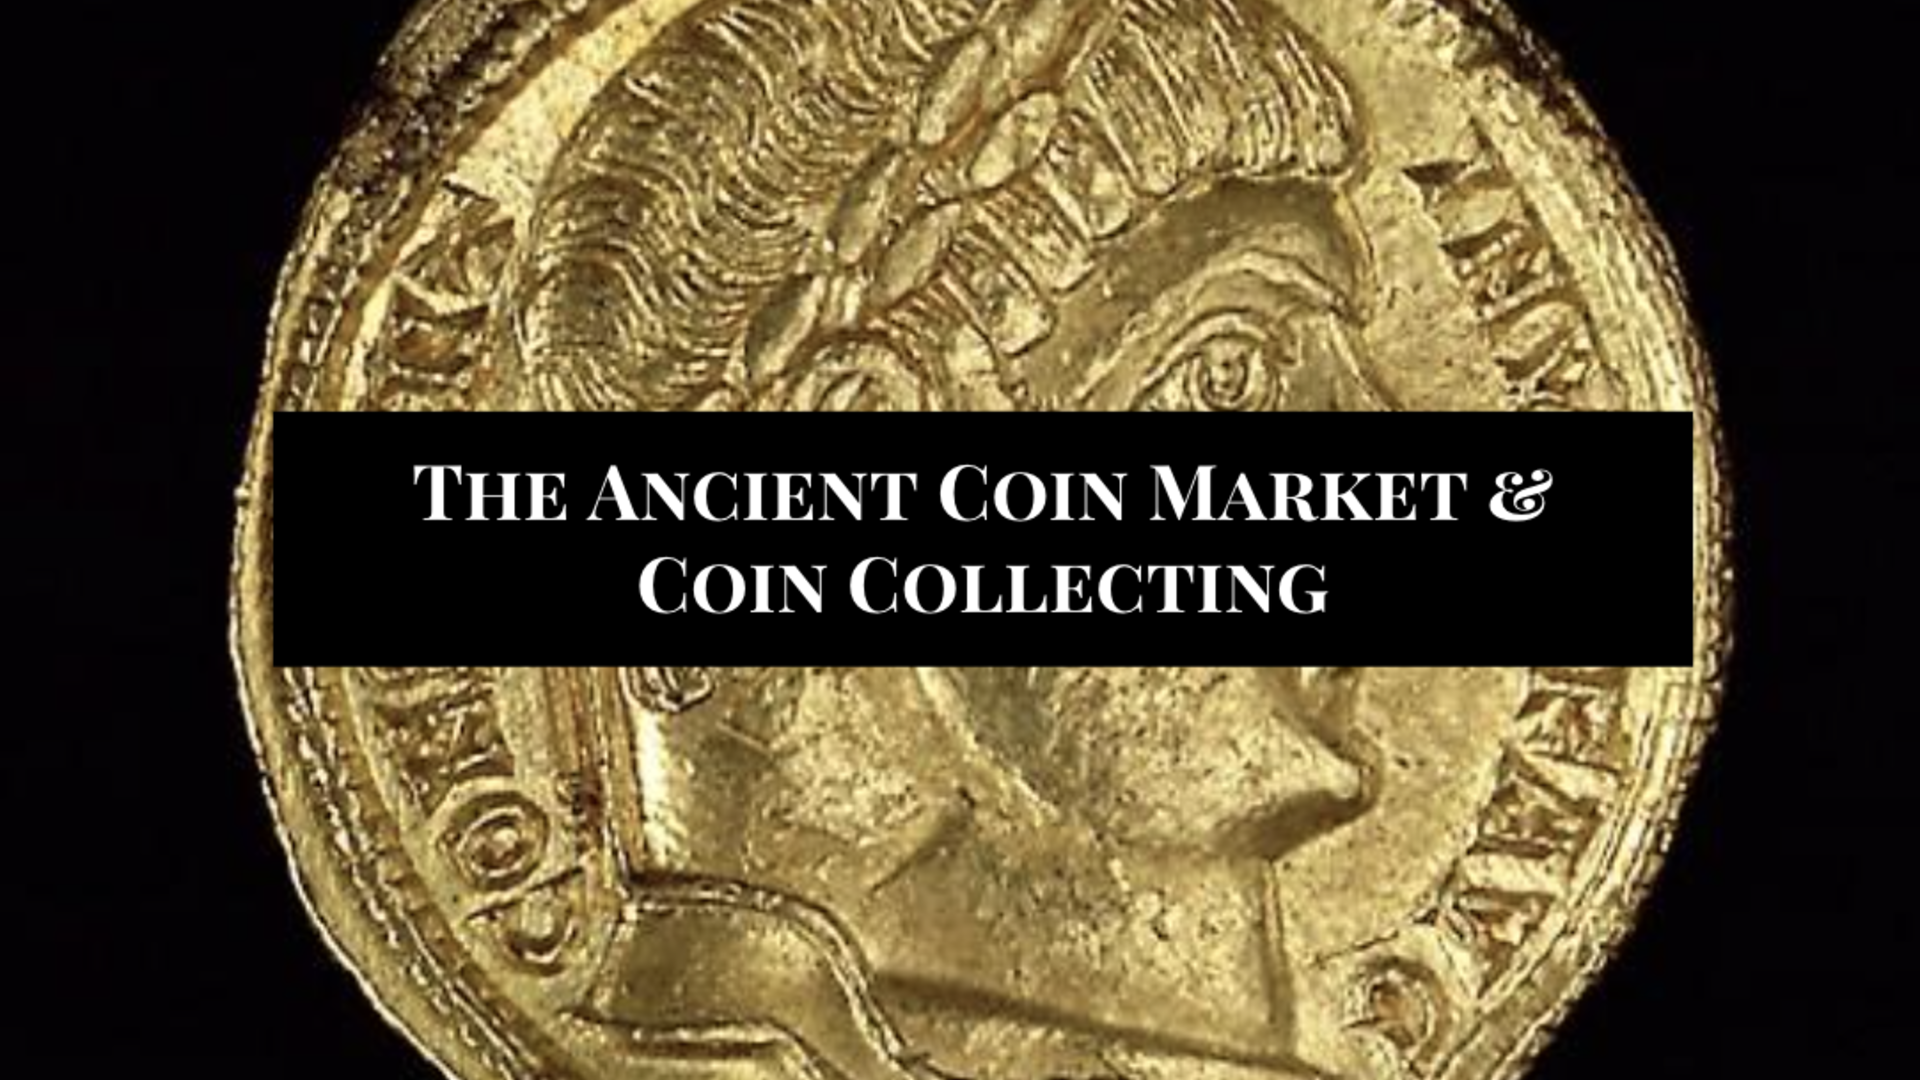 Title: The Ancient Coin Market and Coin Collecting